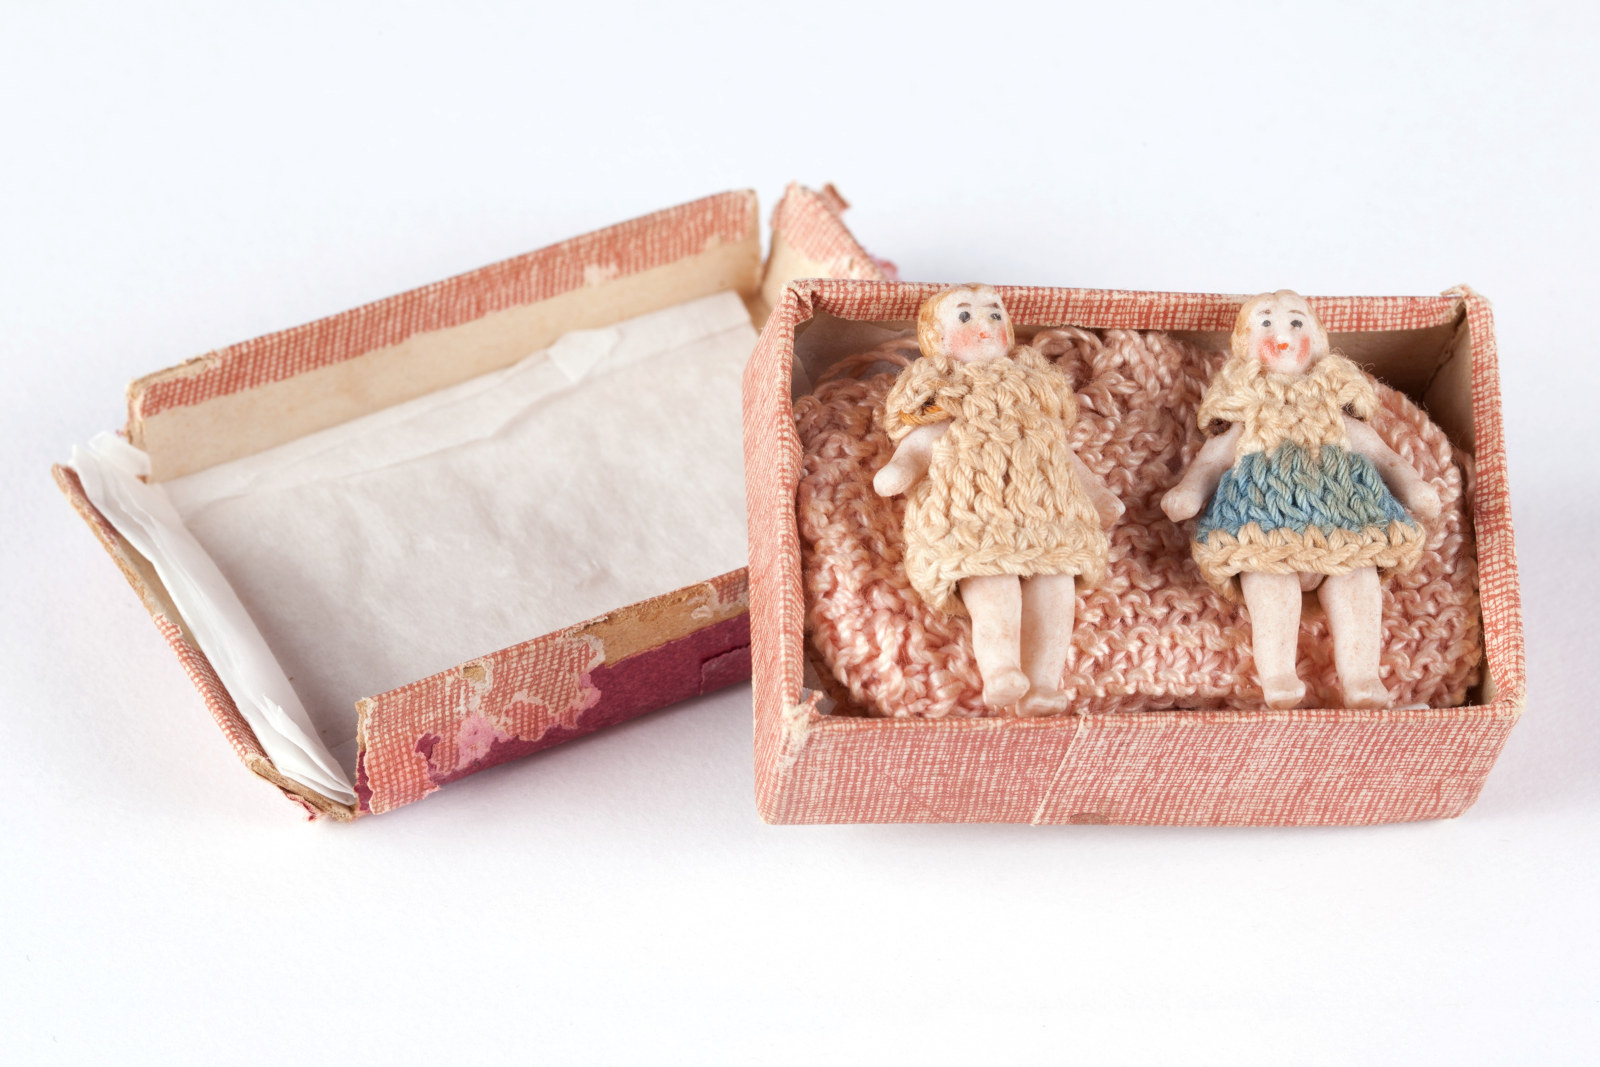 Cardboard box containing two small bisque dolls and a pair of pink knitted booties